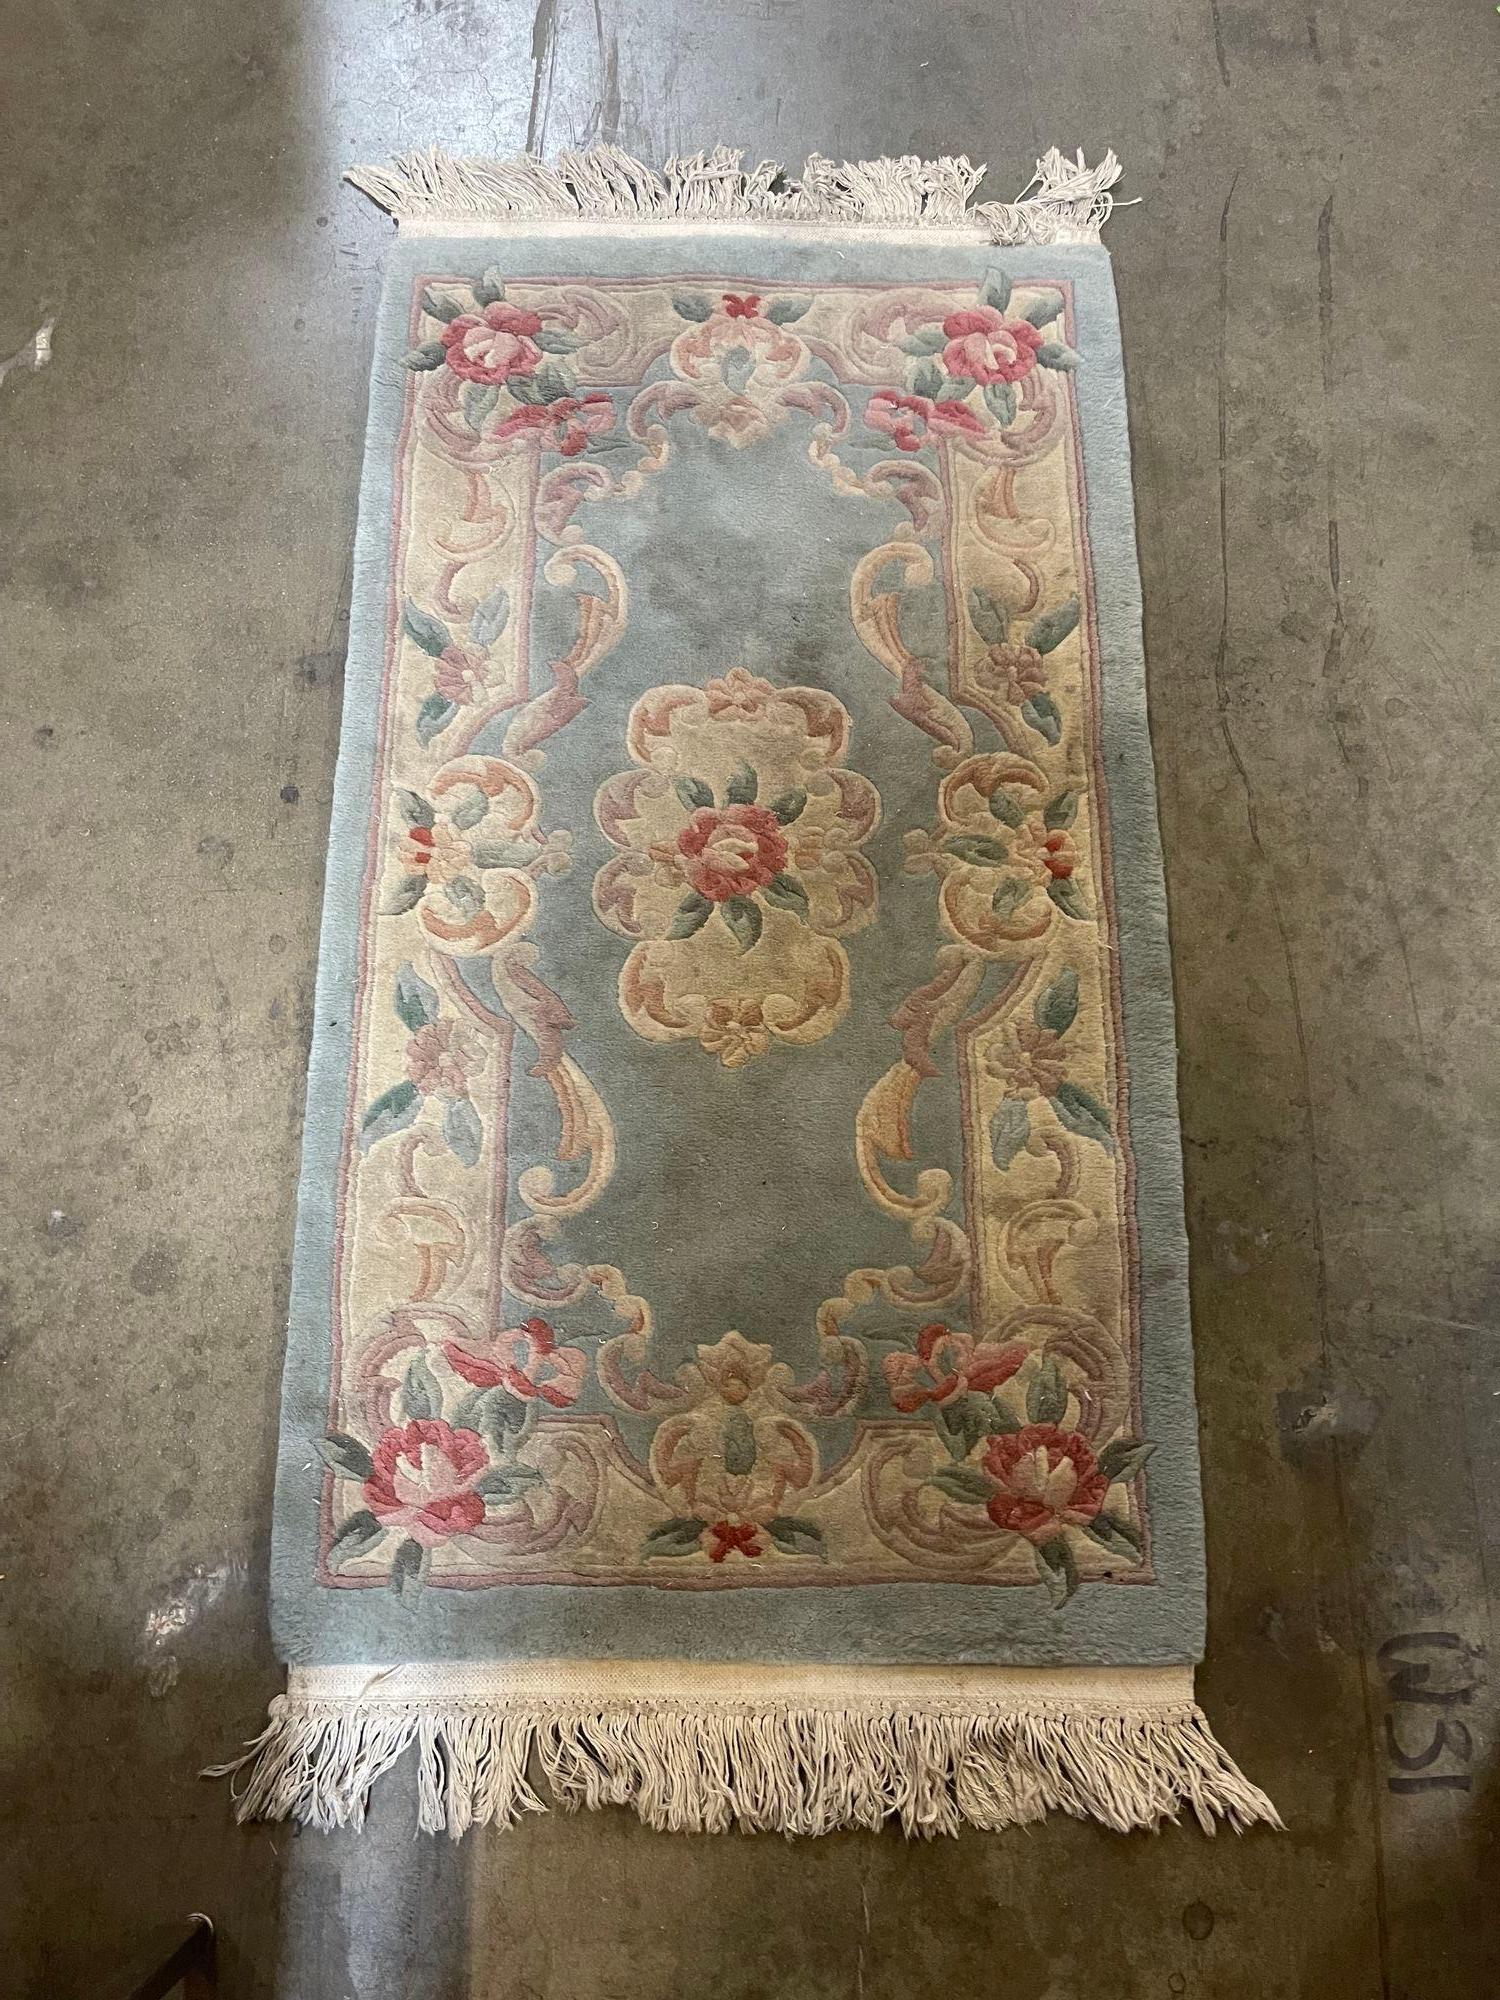 6' x 2' Deep Pile Aubusson Rug with French Roses design 3.5' x 2' In Excellent Condition For Sale In Van Nuys, CA